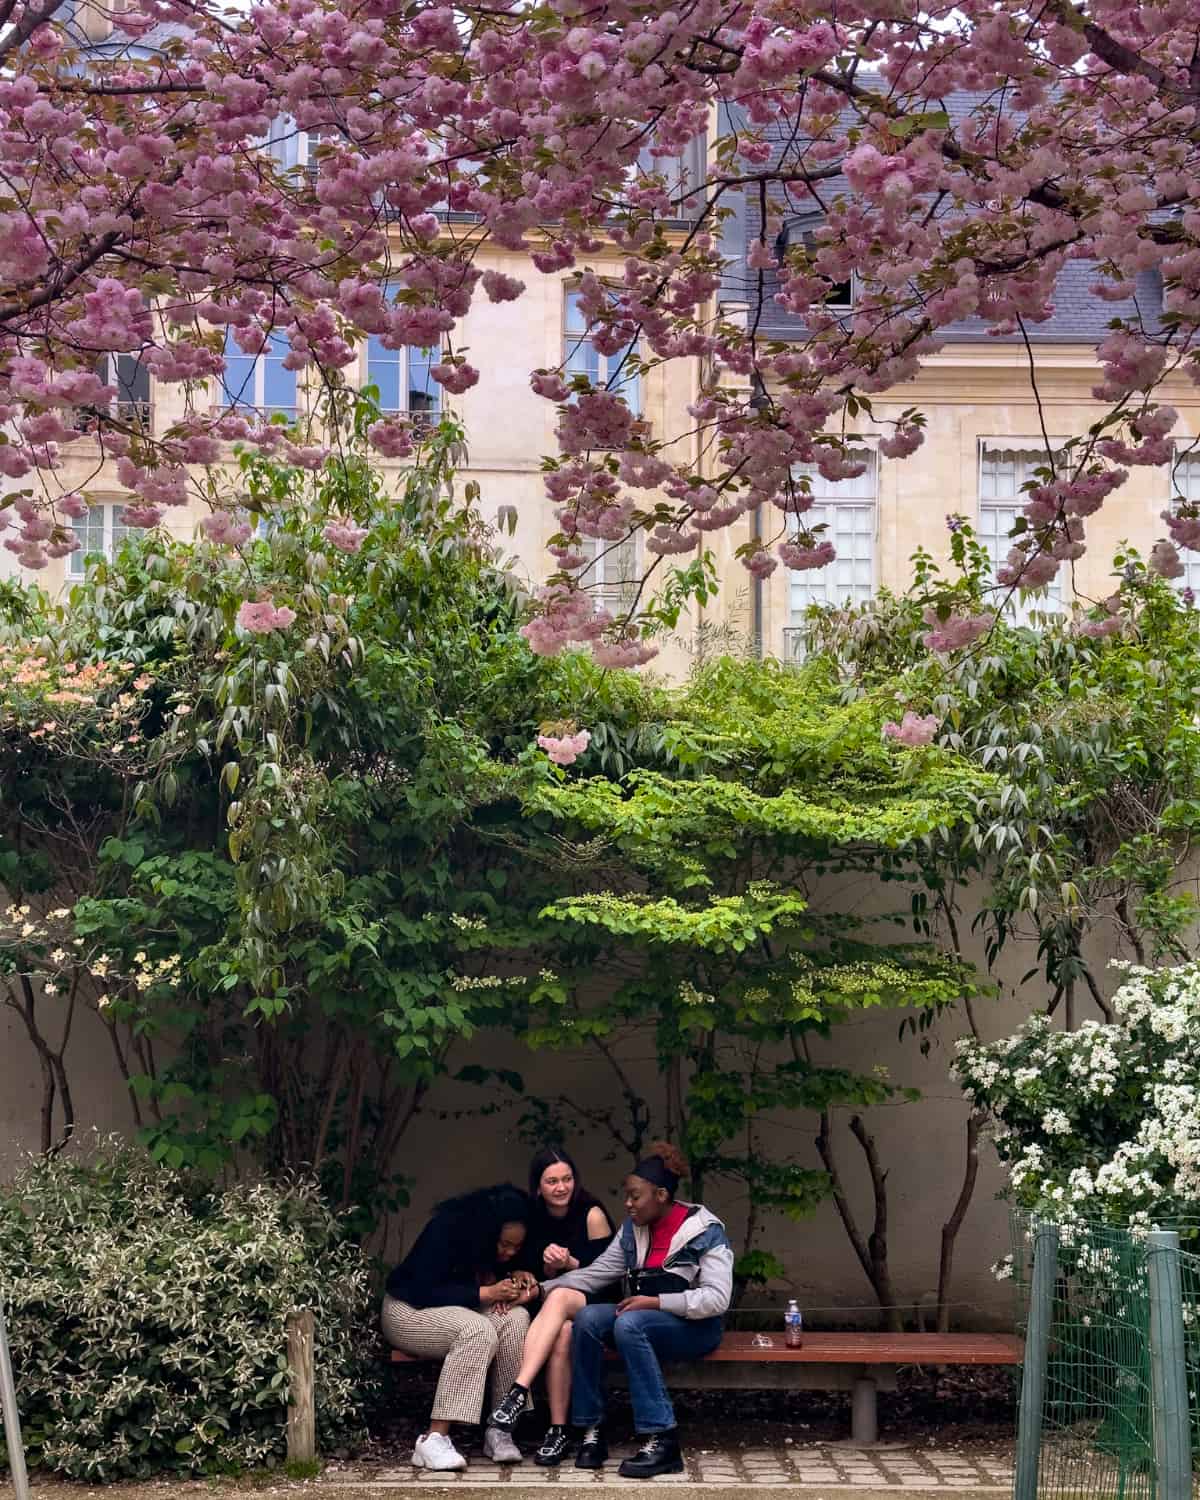 Blooming cherry blossom trees at Jardin Anne Frank, with a couple of Parisians enjoying themselves